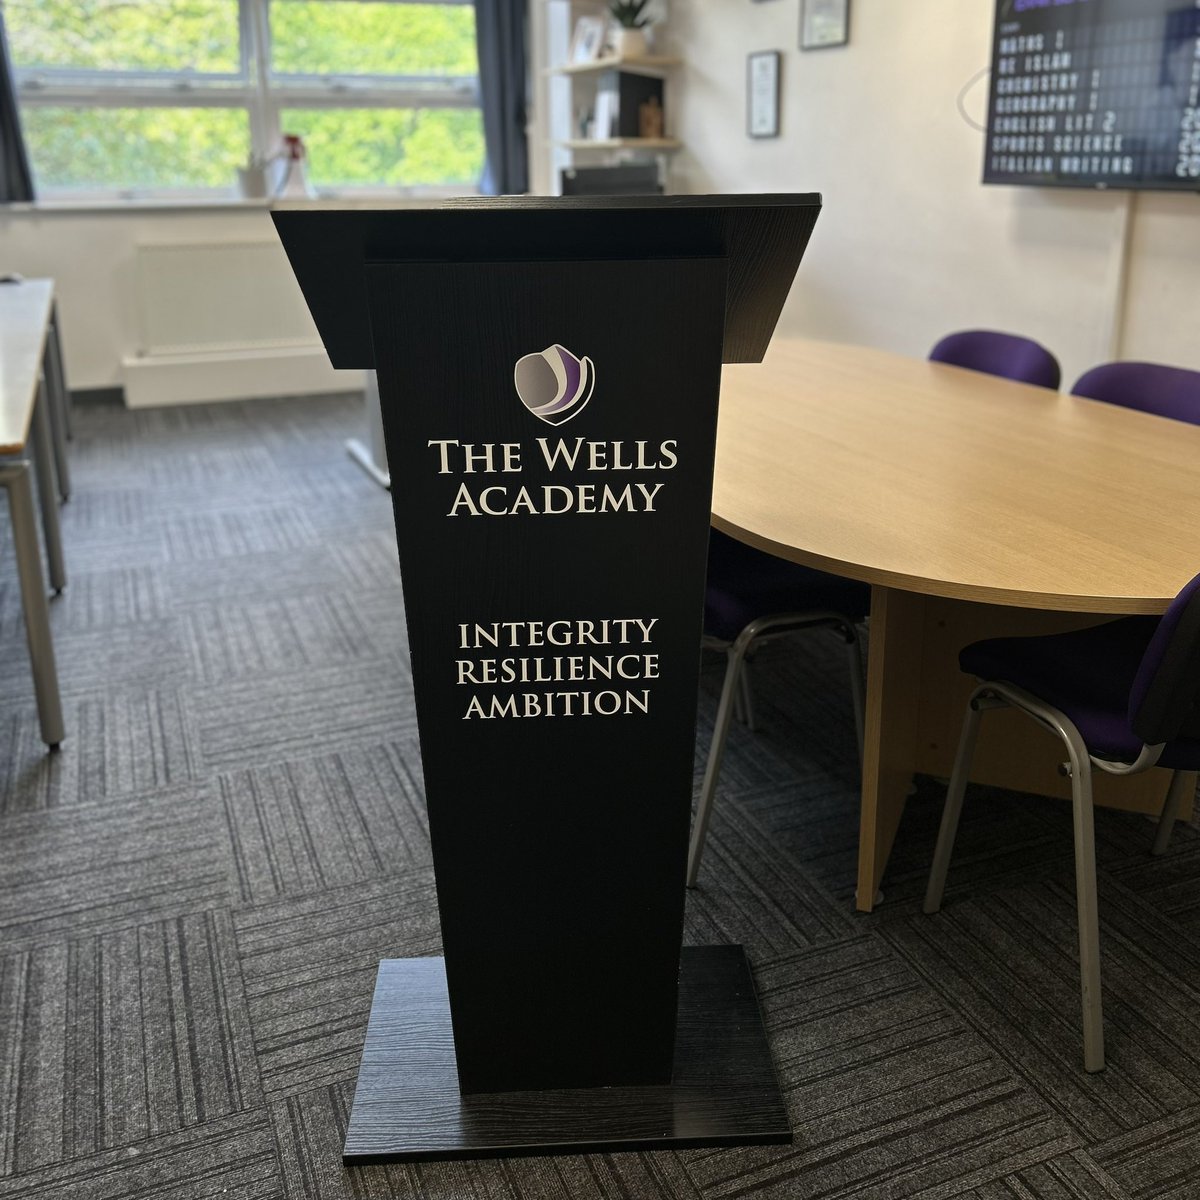 Be still my beating heart! Absolutely love our new @TheWellsAcademy lectern that was delivered this week! Can’t wait to lead an assembly with this!